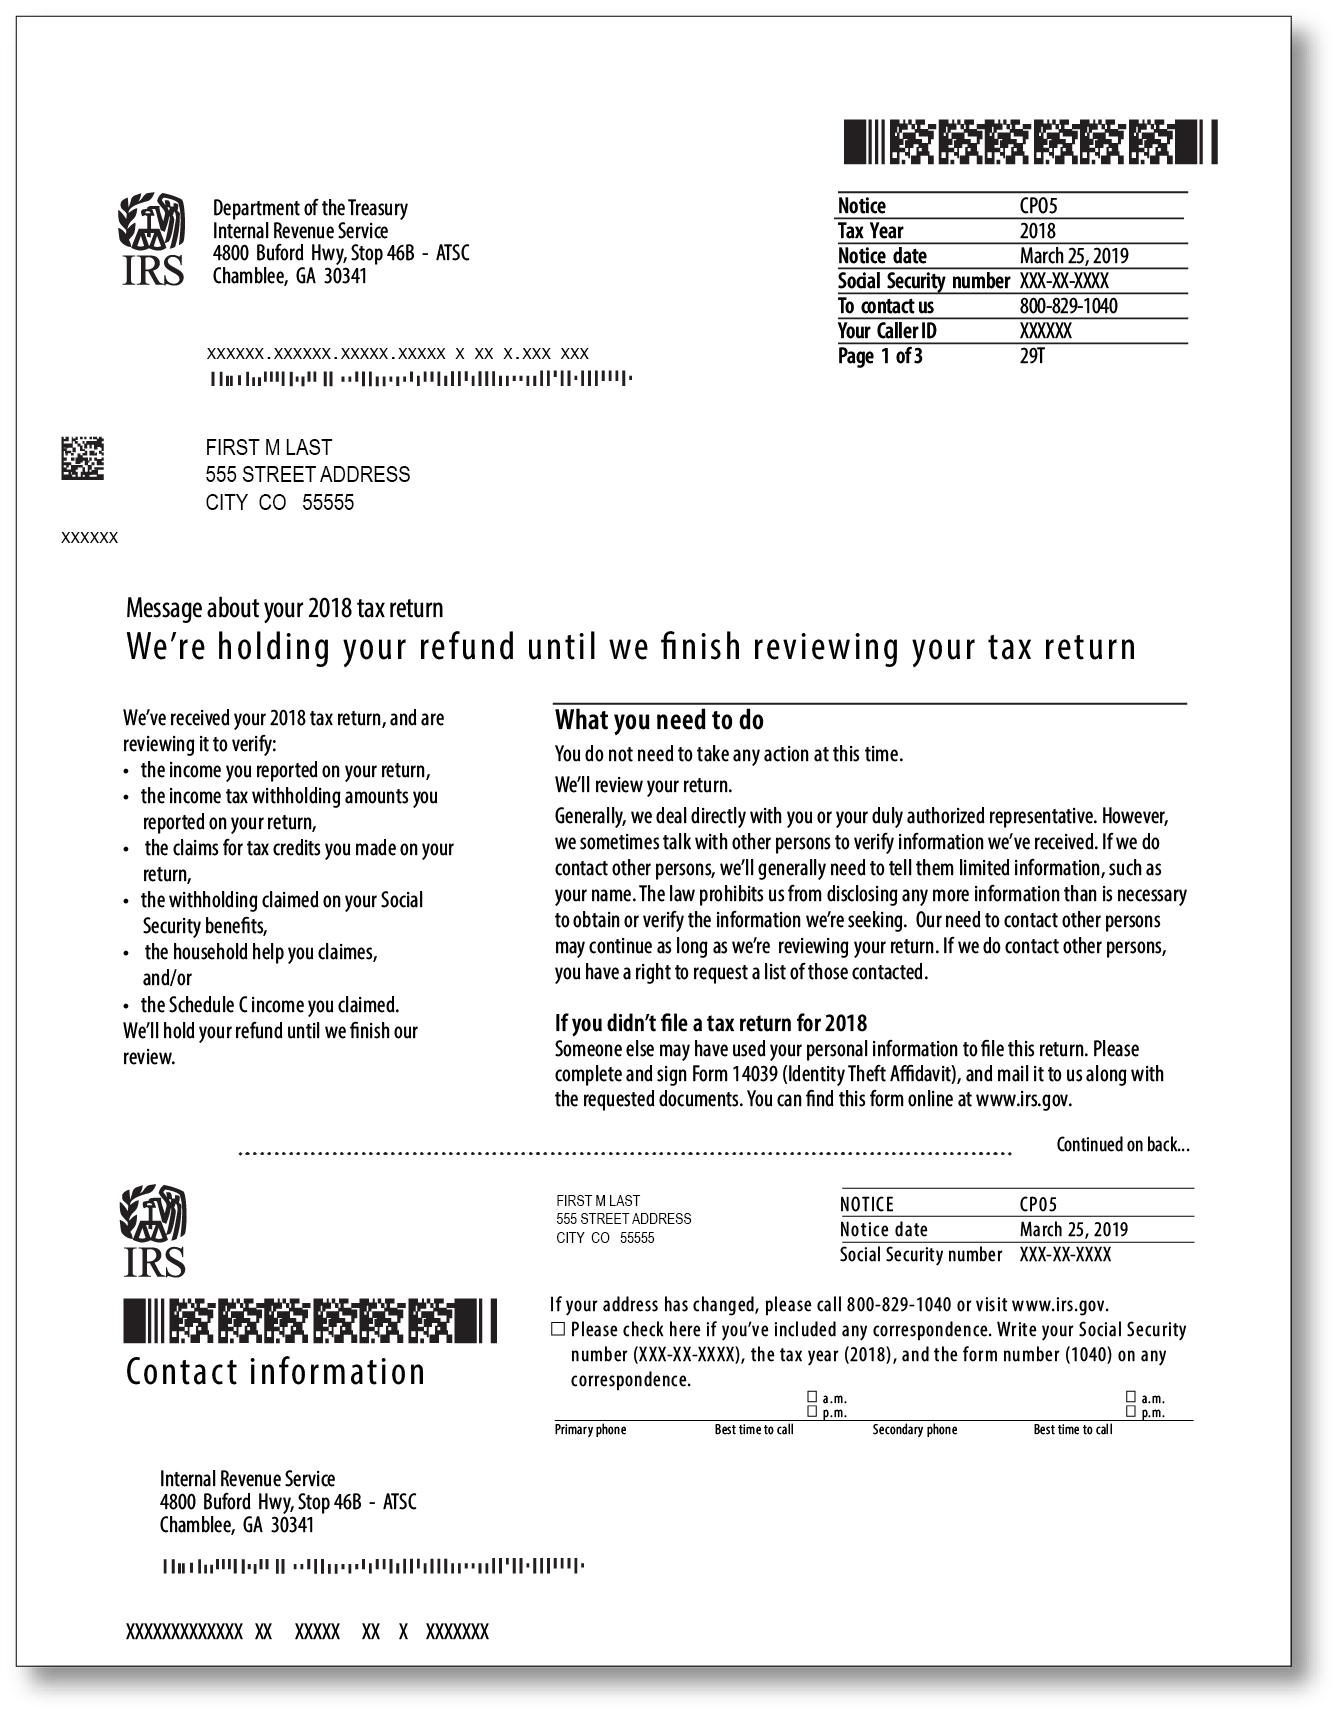 IRS Audit Letter CP05 Sample 1